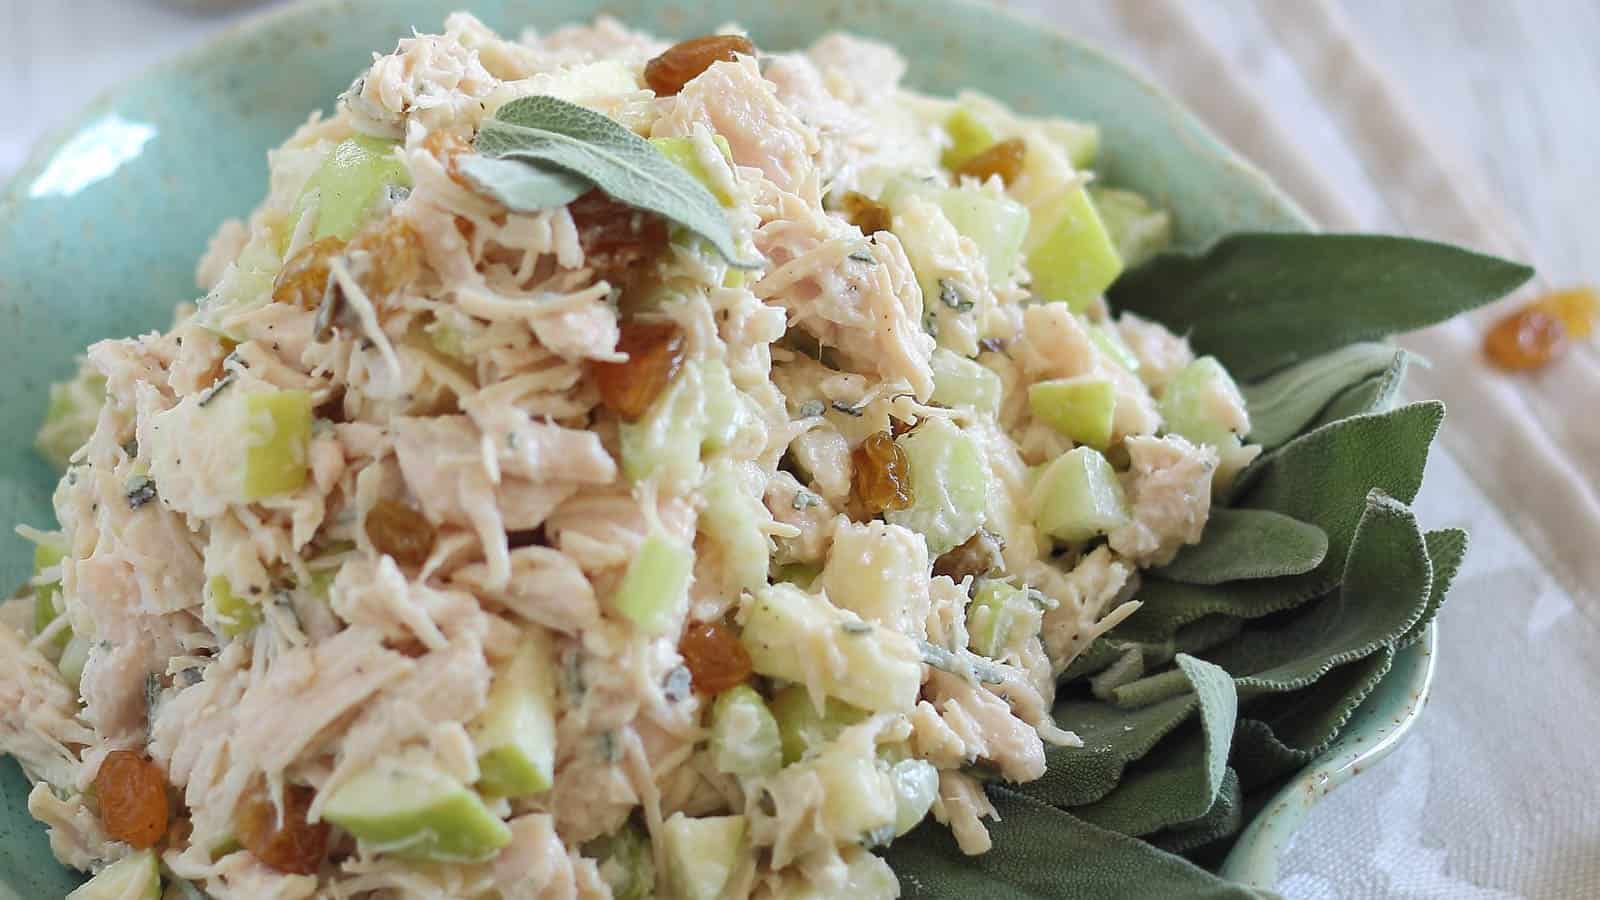 Honey apple chicken salad with fresh sage leaves in a teal bowl.